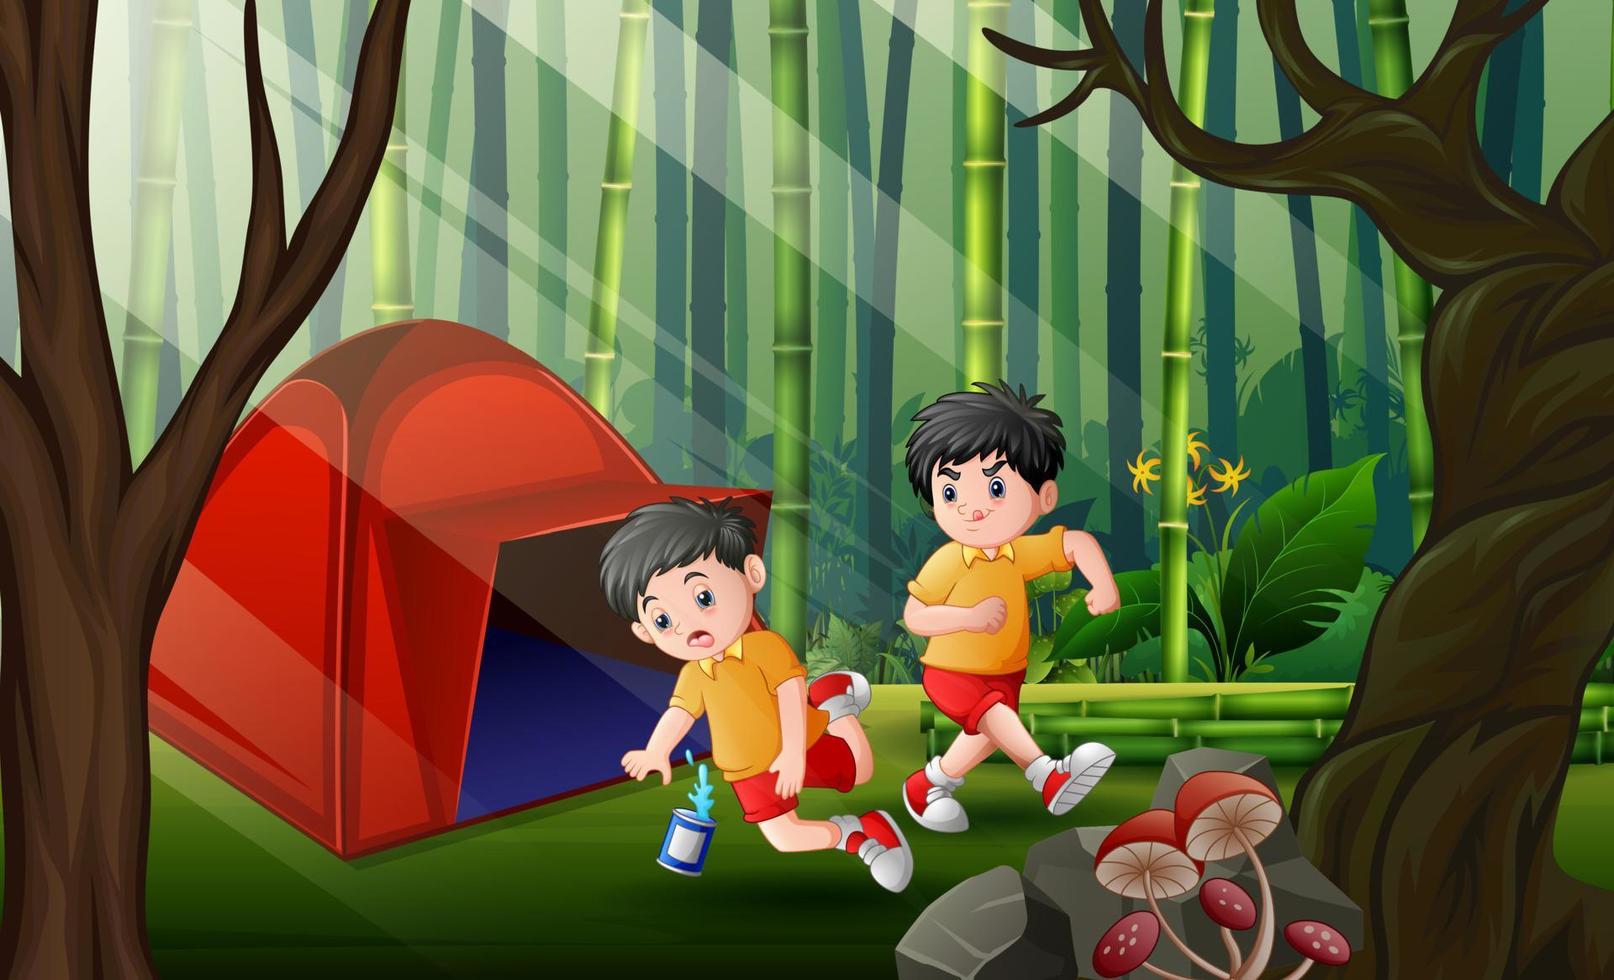 Scene with camping tent and two boys playing vector